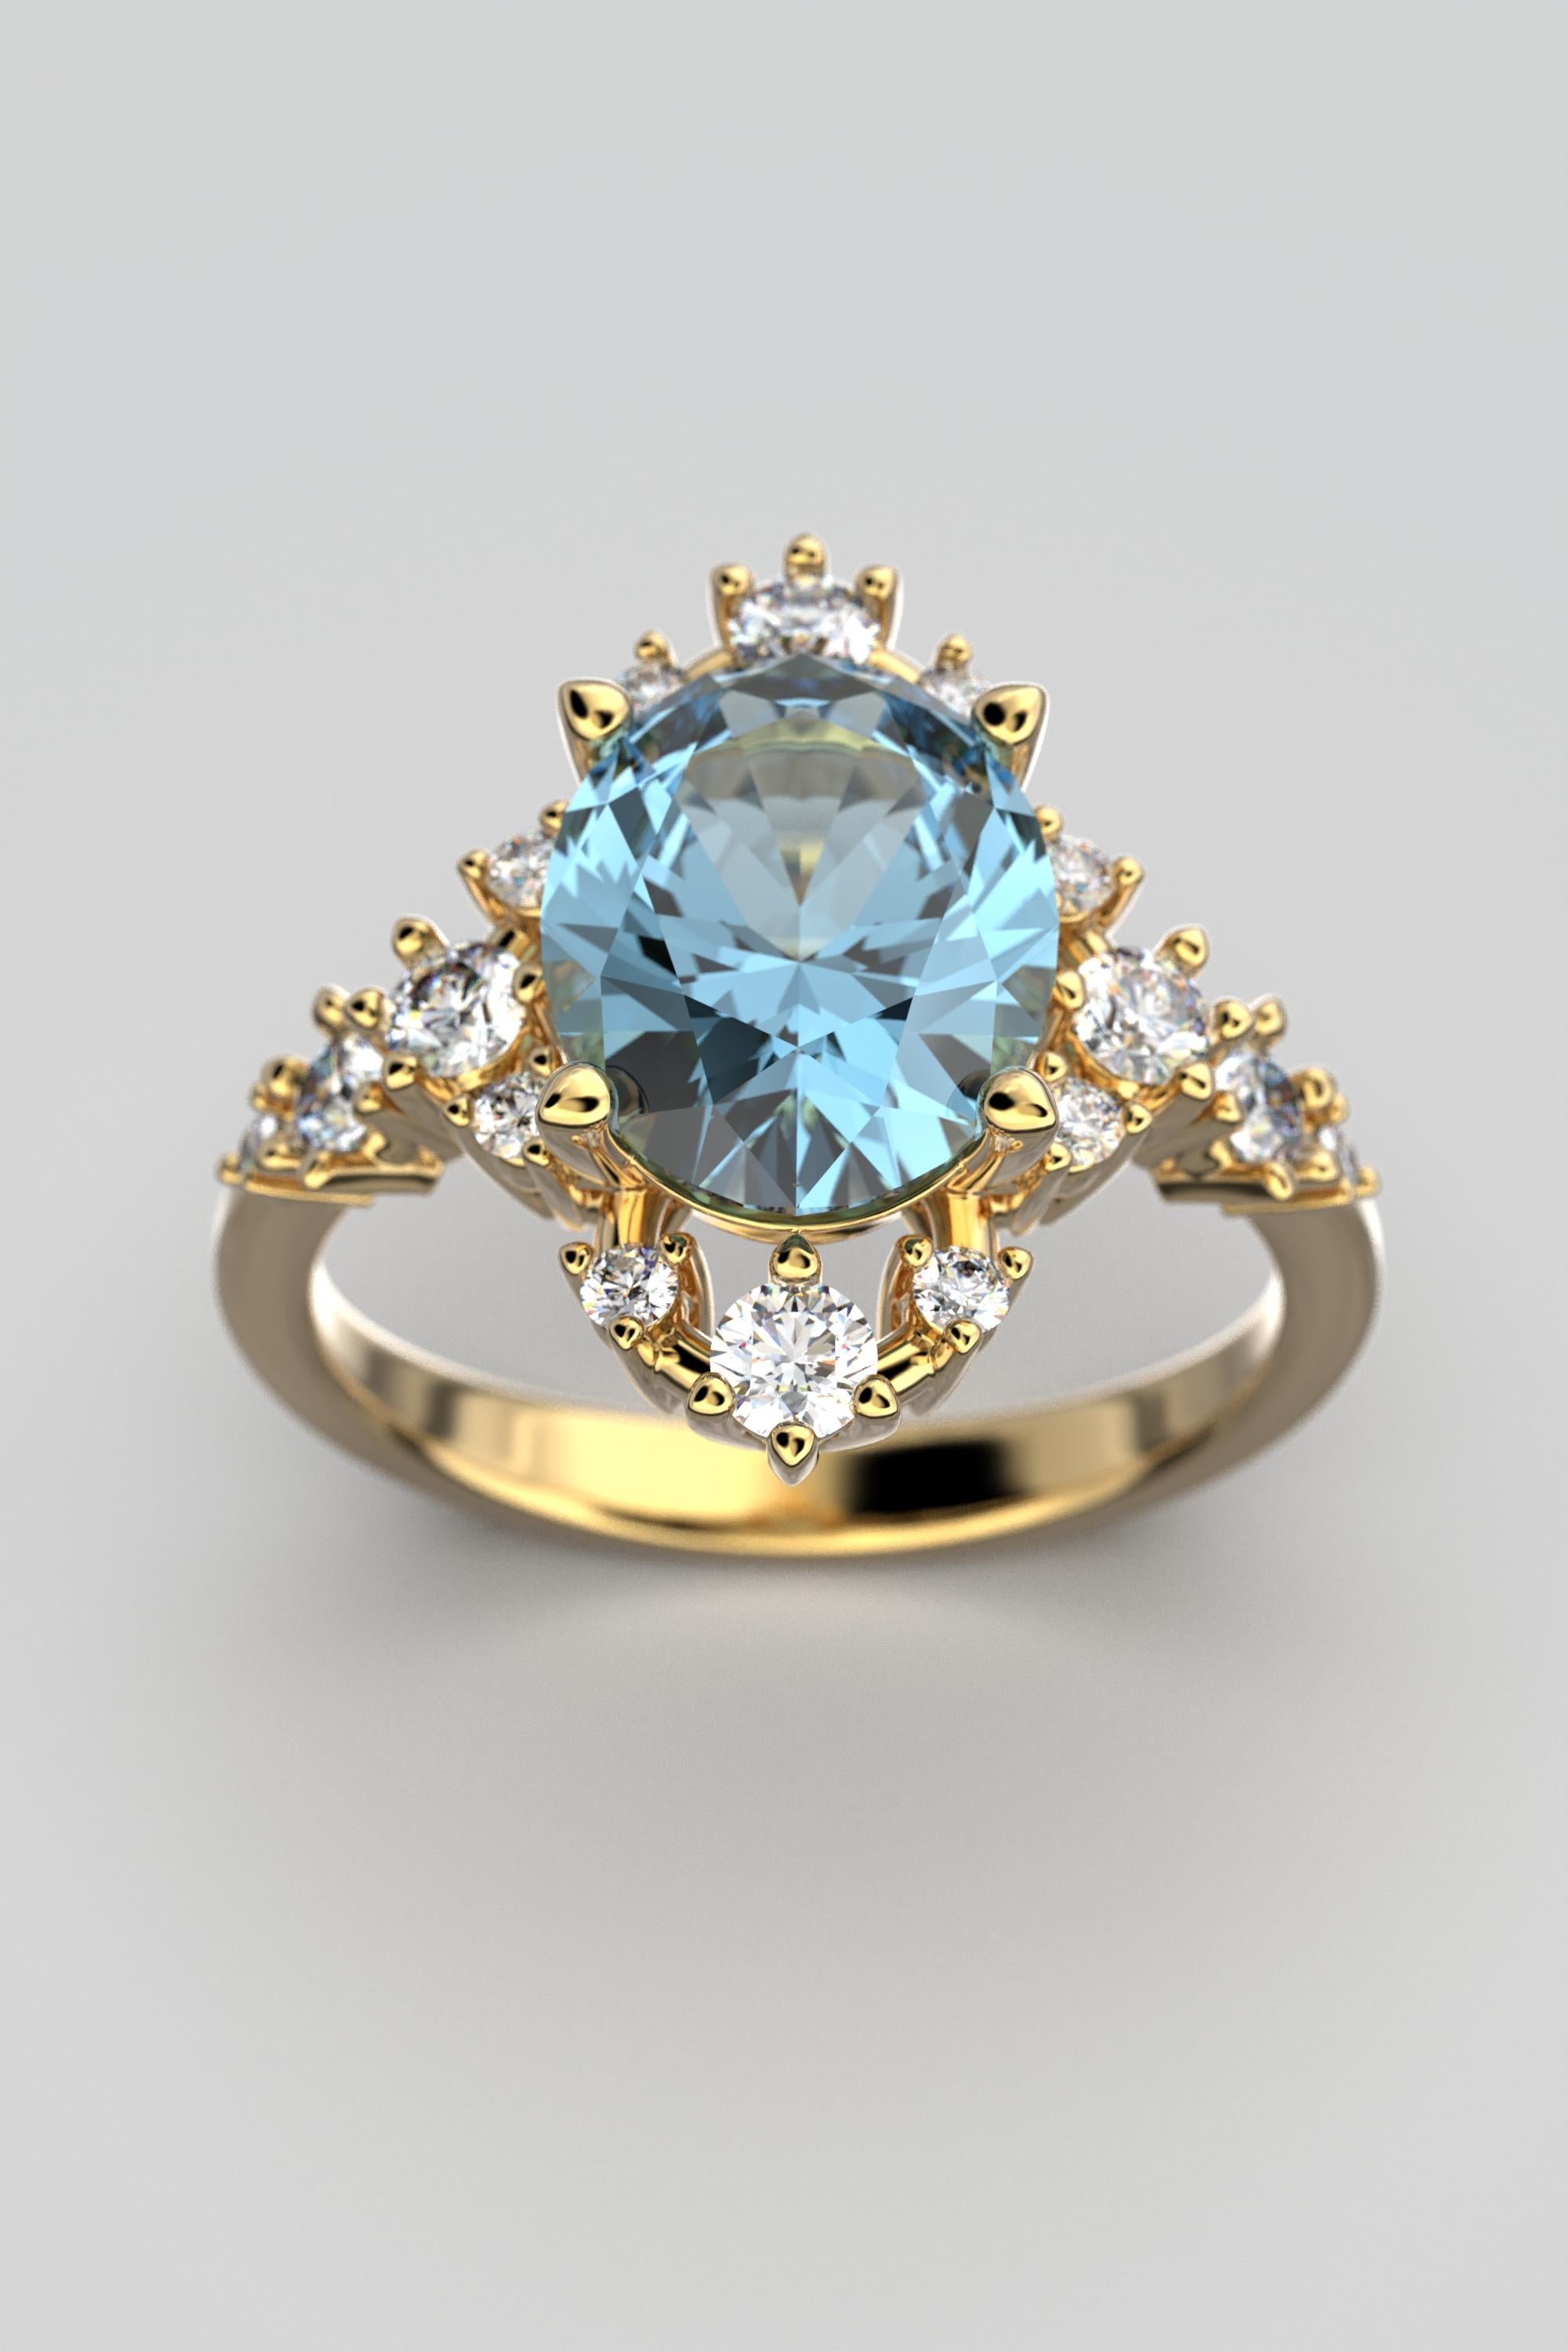 For Sale:  18k Gold Aquamarine Ring With Natural Diamonds Made in Italy Oltremare Gioielli 14